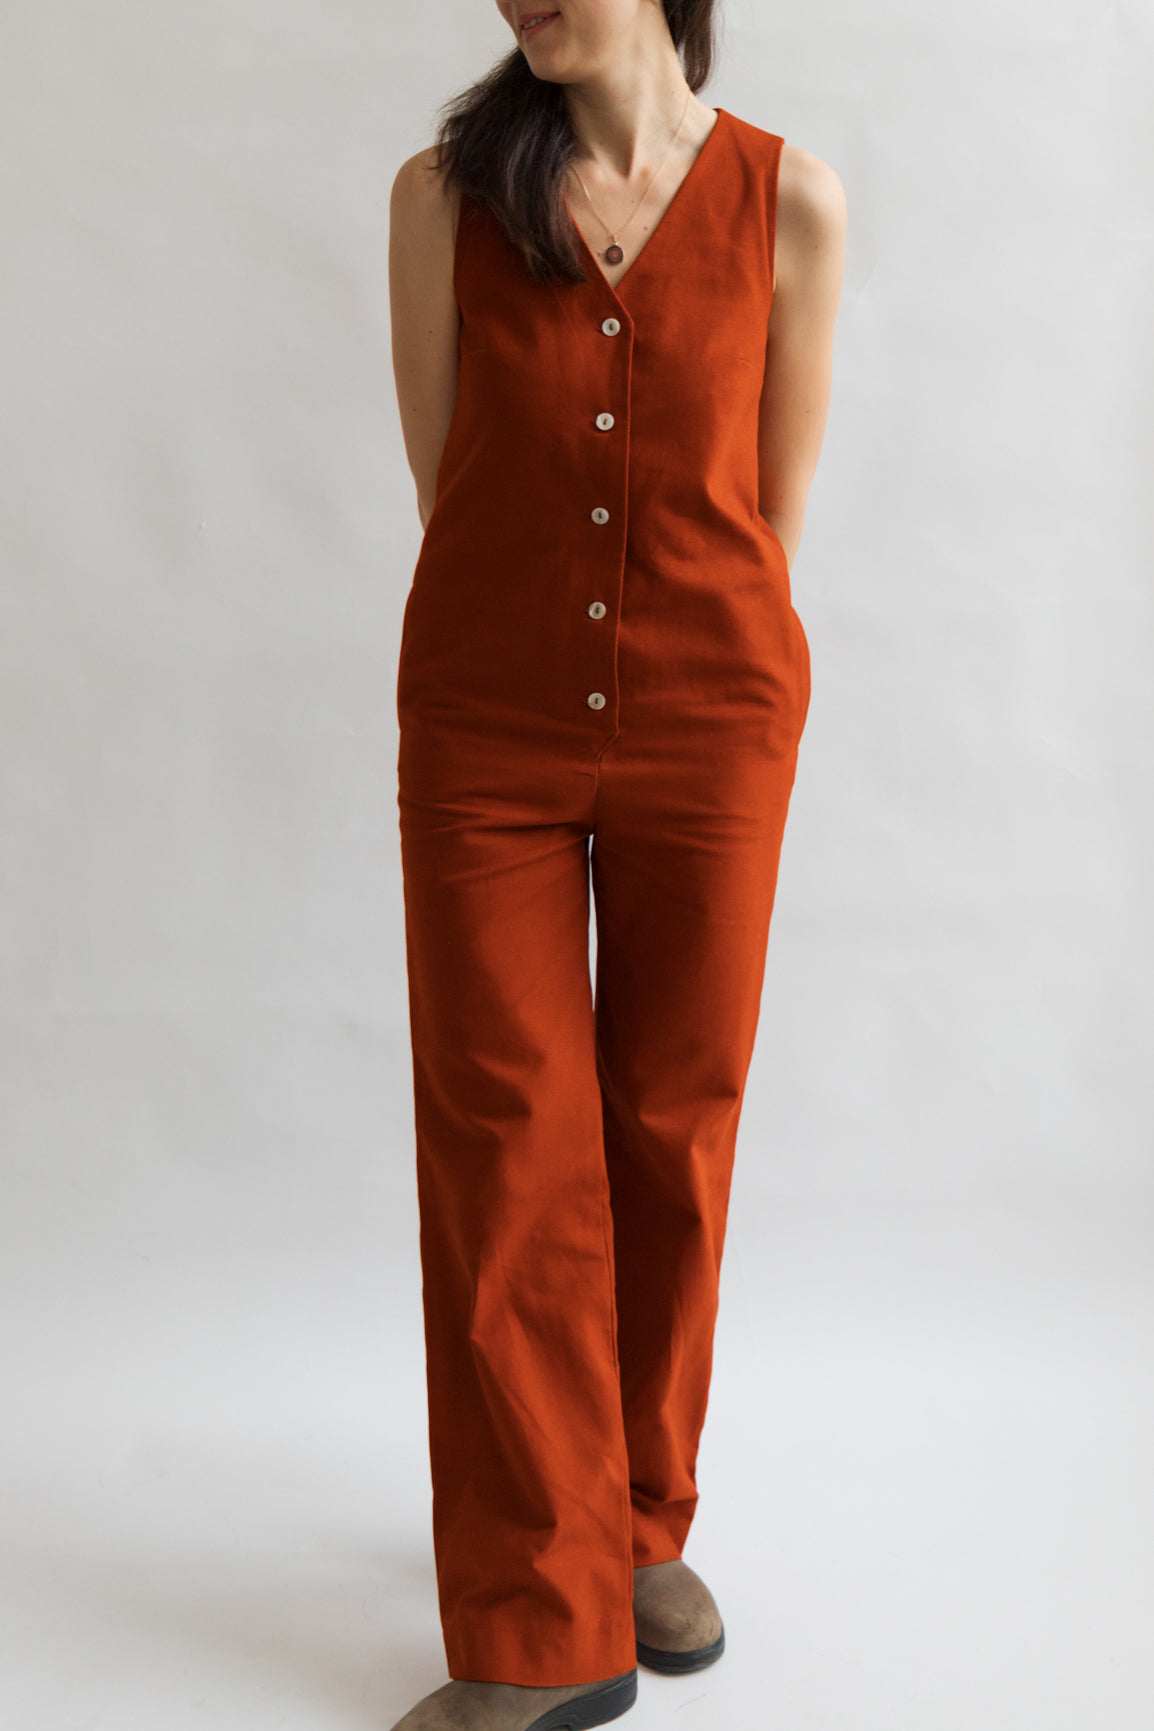 Burnt Orange rust sienna terracotta ginger color Jumpsuit overall workwear cotton canvas with pockets 5 buttons v-neck tall girls short girls oeko-tex sustainable clothes handmade